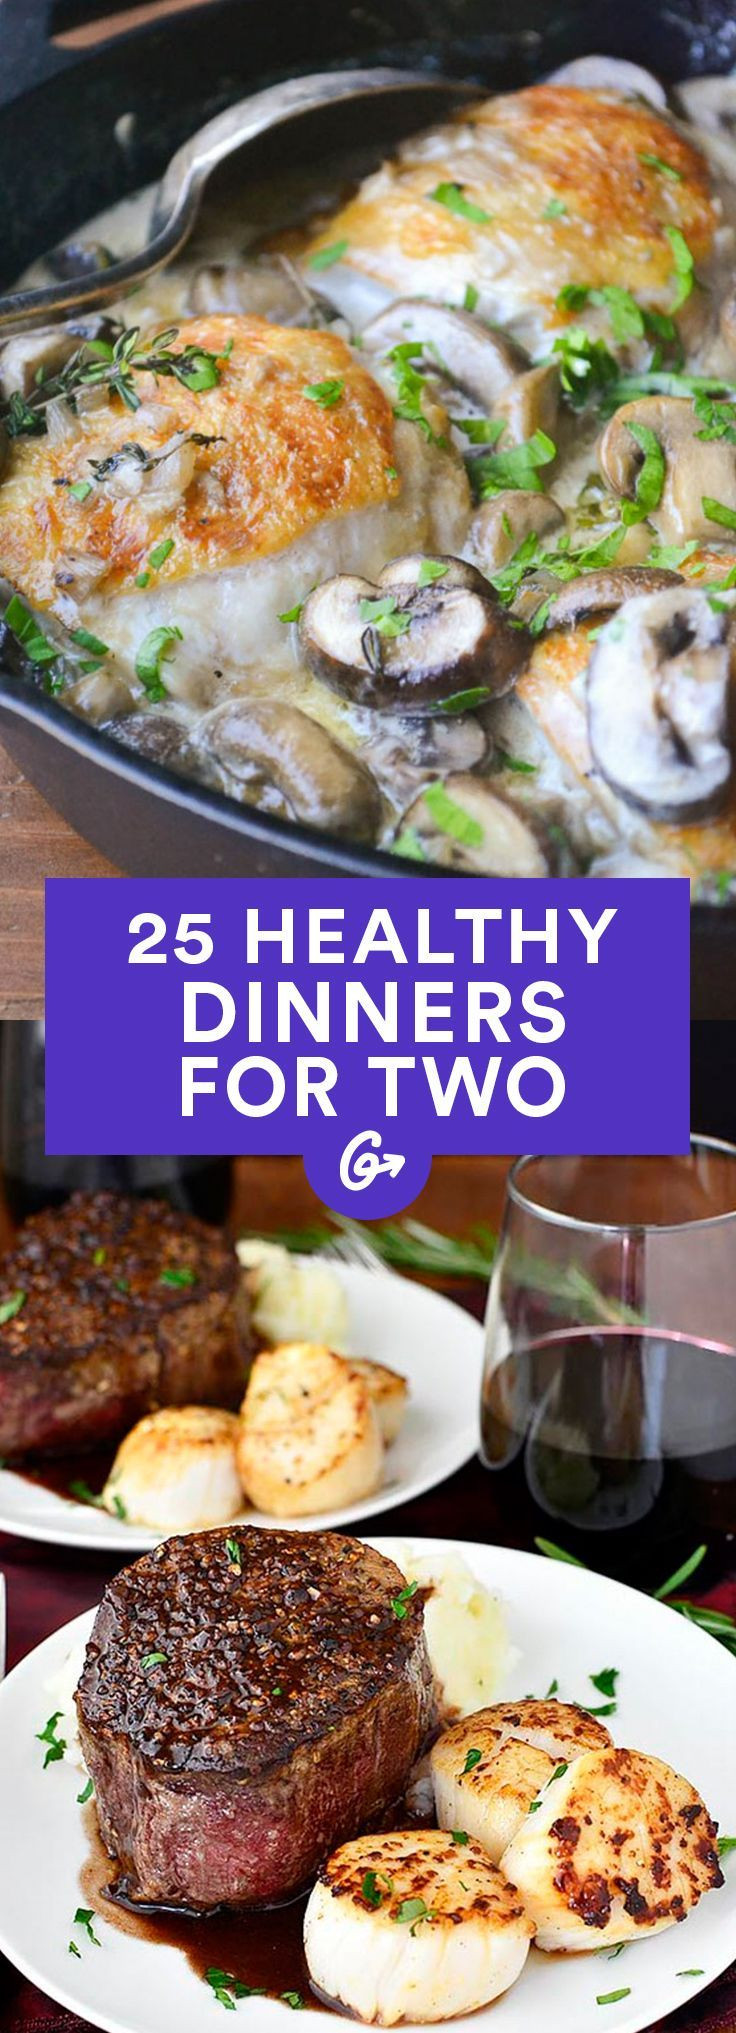 Dinner Ideas For 2
 25 Healthy Dinner Recipes for Two